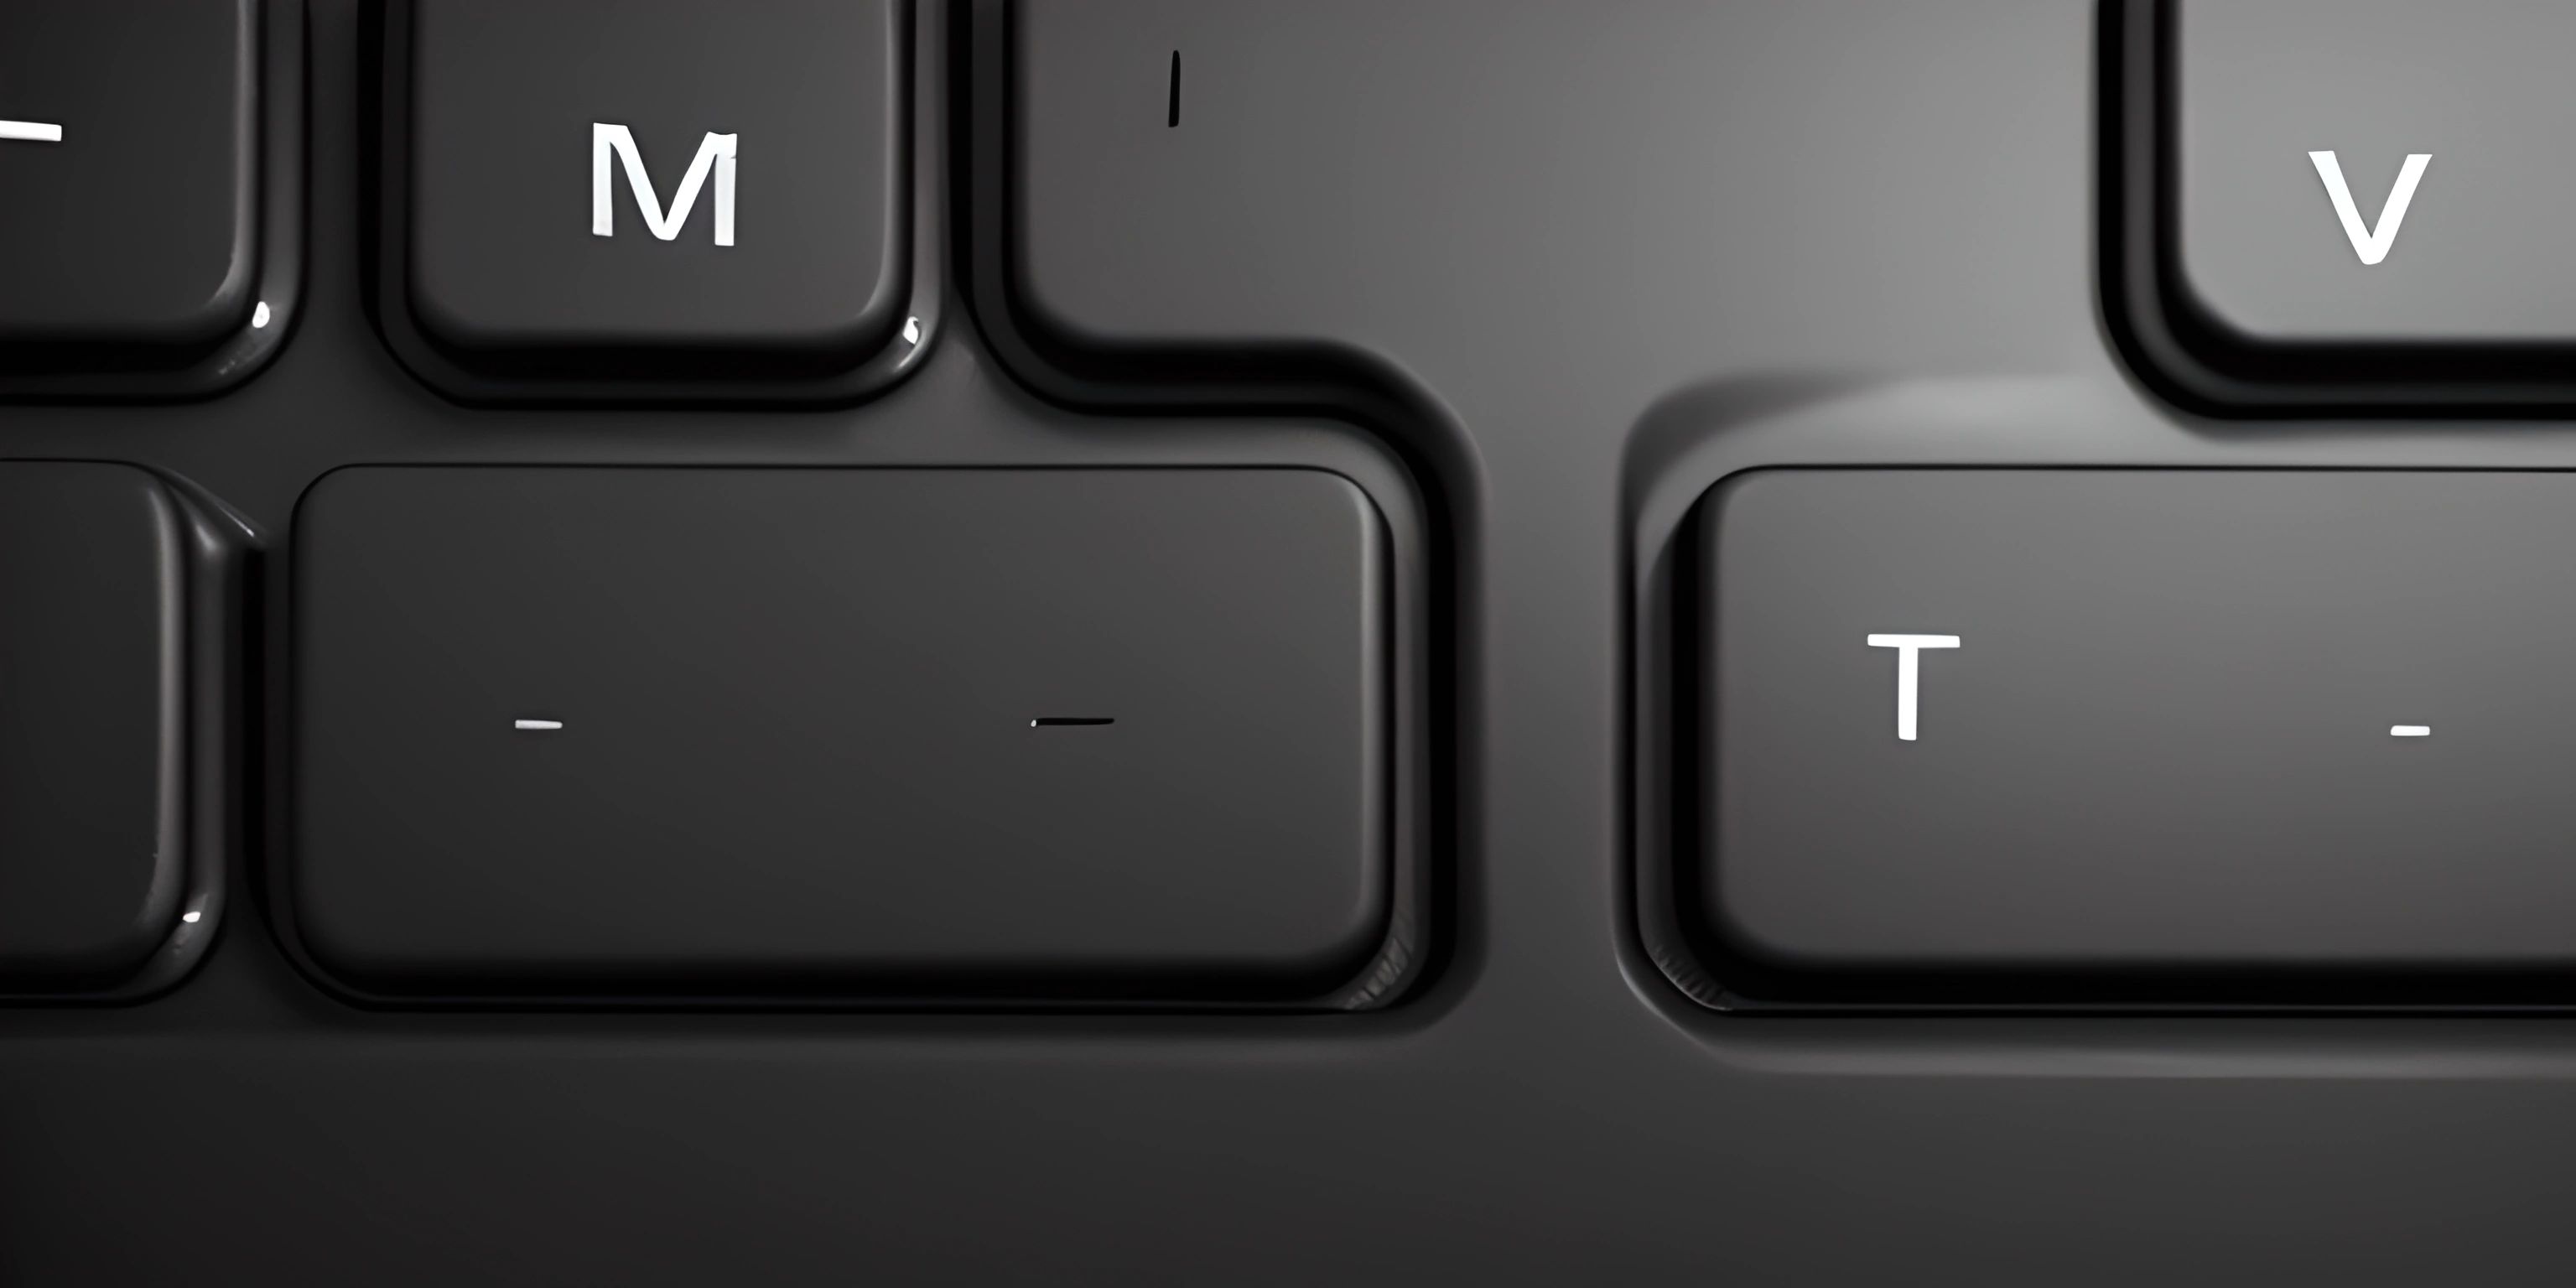 a close up image of a keyboard with two key numbers on the buttons and one is showing